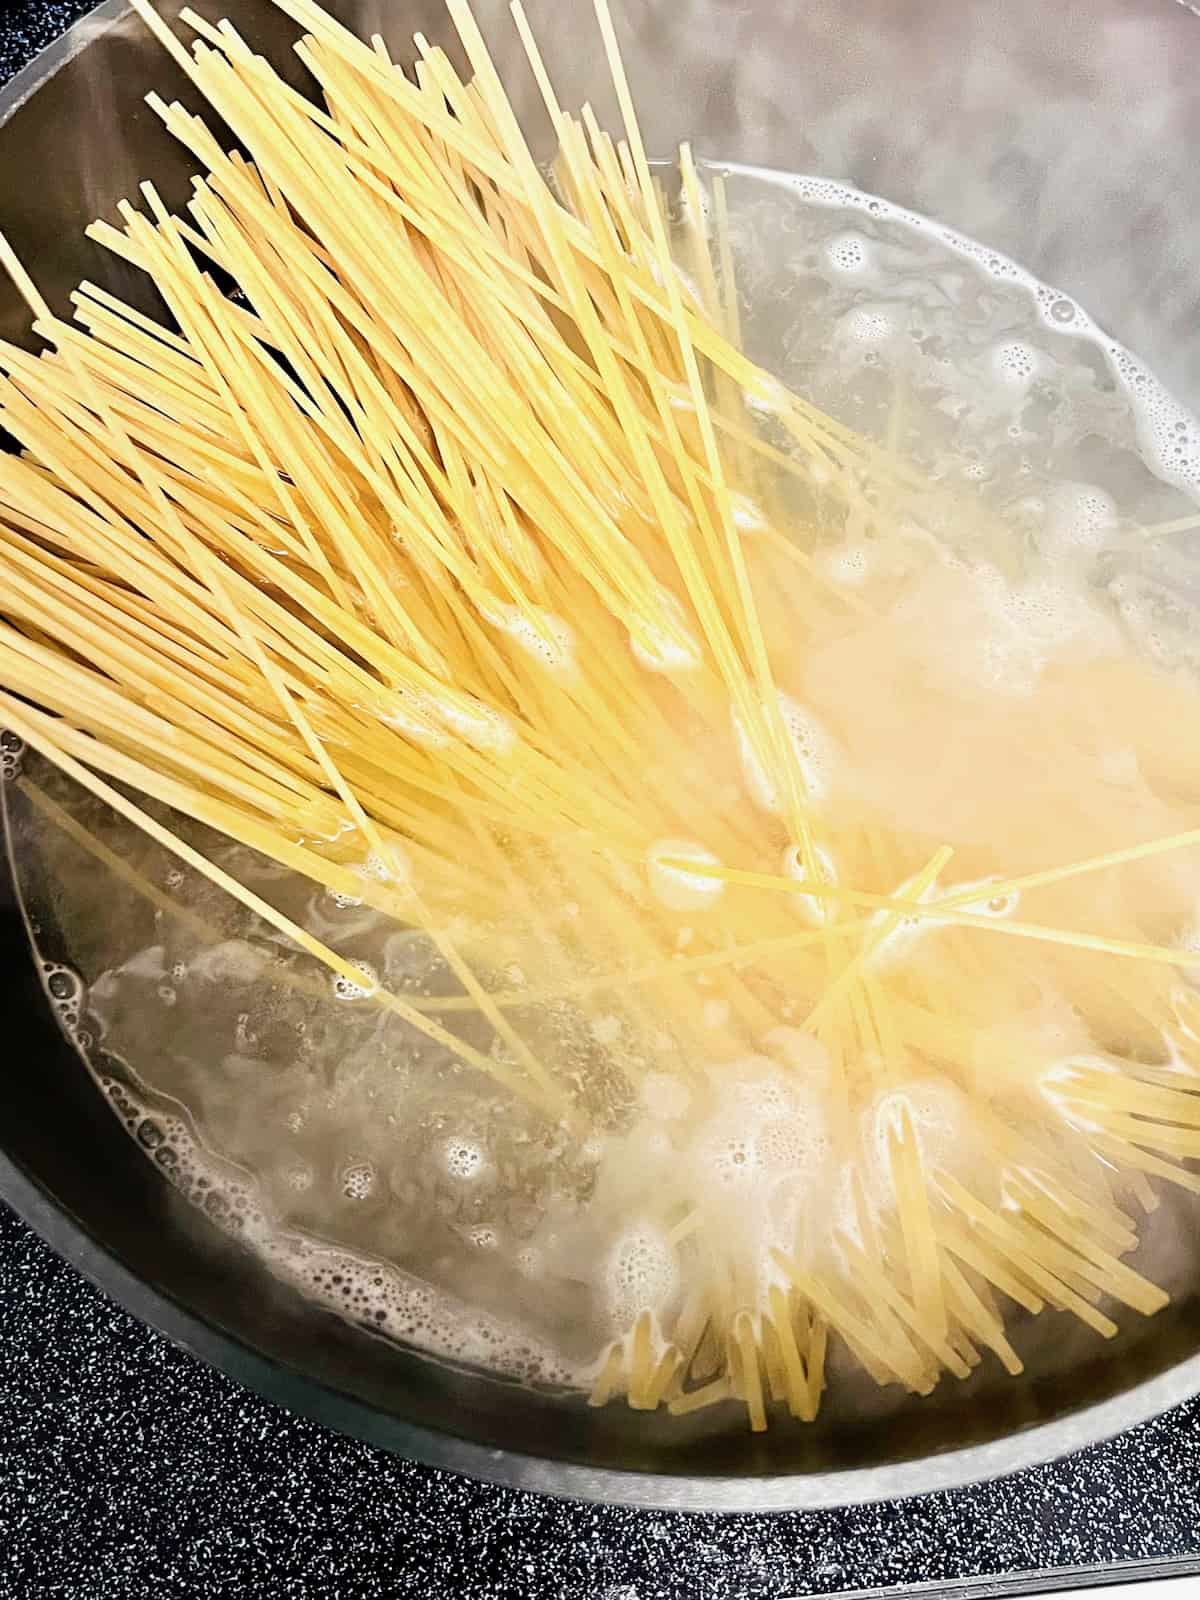 Spaghetti noodles in a pot of boiling water.